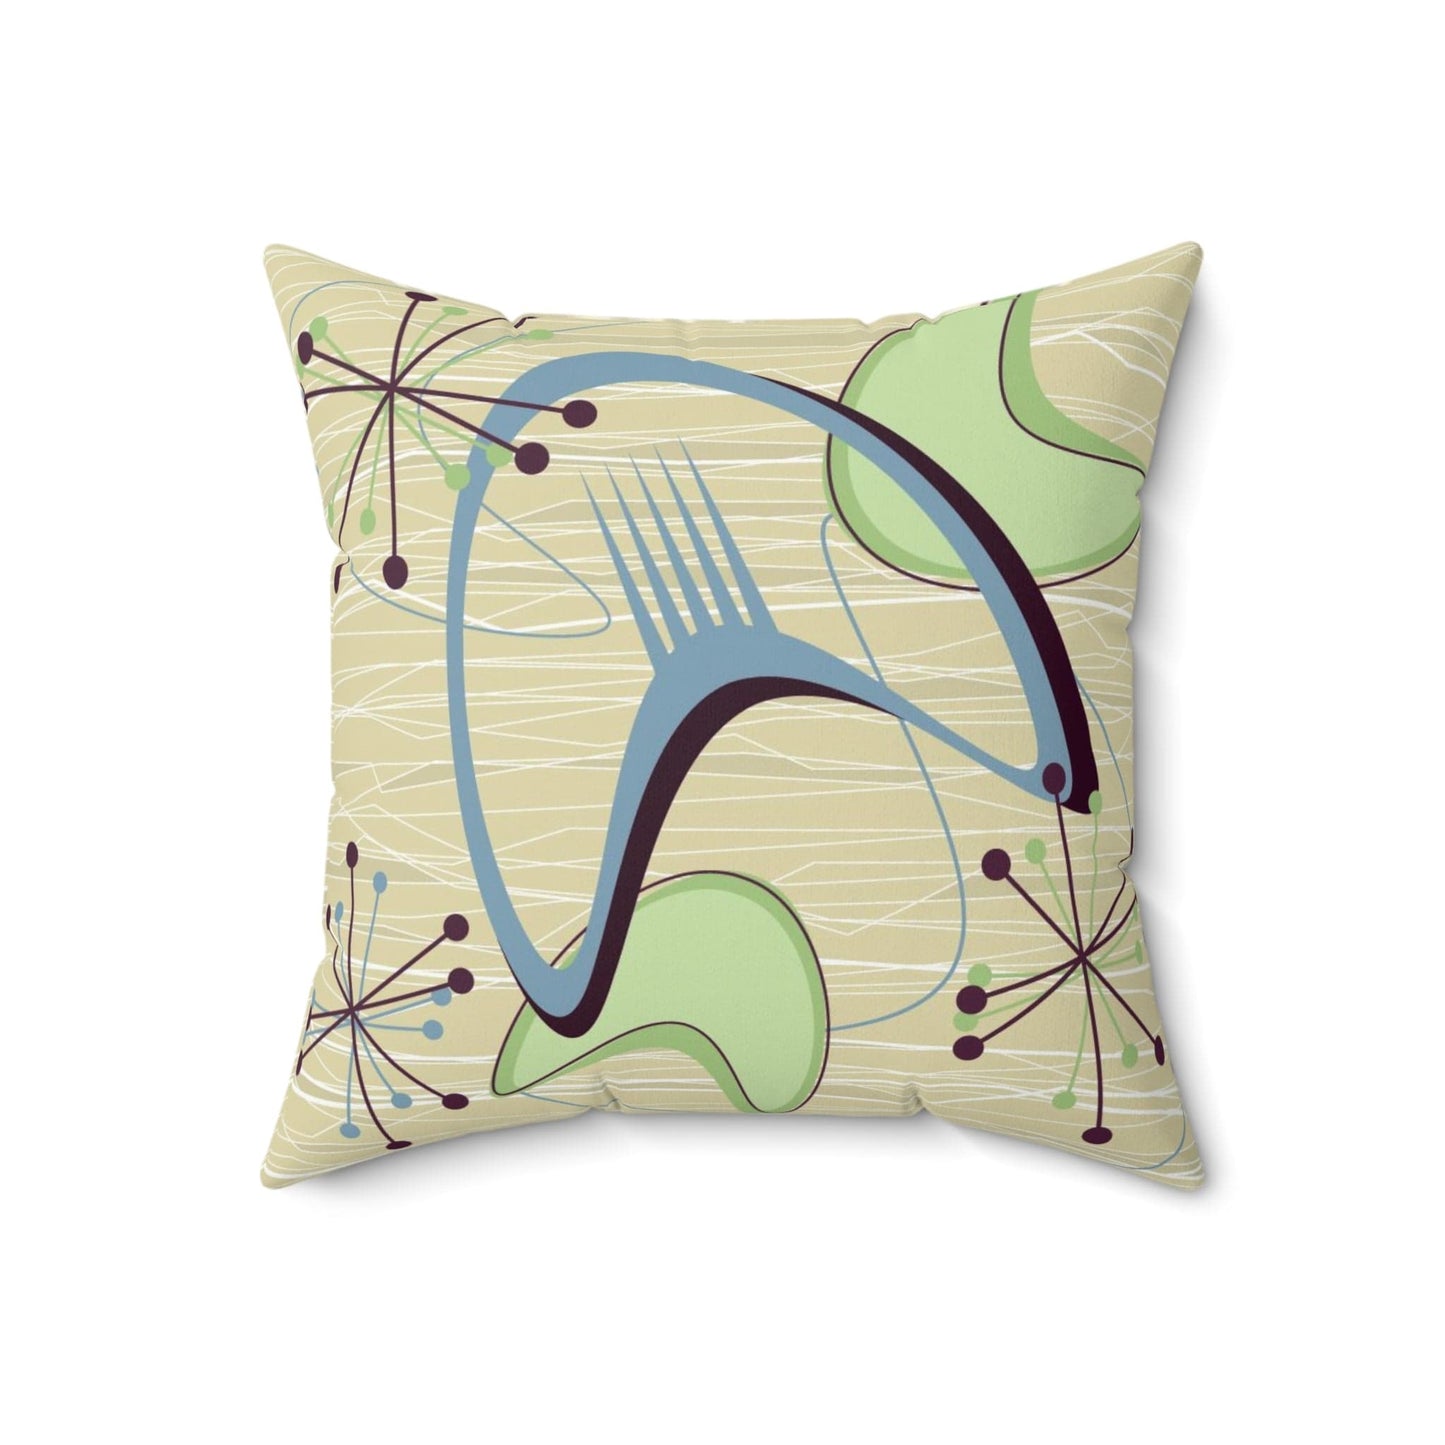 Printify 1950s Atomic Boomerang Mid Century Modern Throw Pillow in Retro Vintage Beige, Blue, Green Geometric Starbursts, MCM Abstract Accent Pillow Home Decor 18" × 18" 18545395407889238851